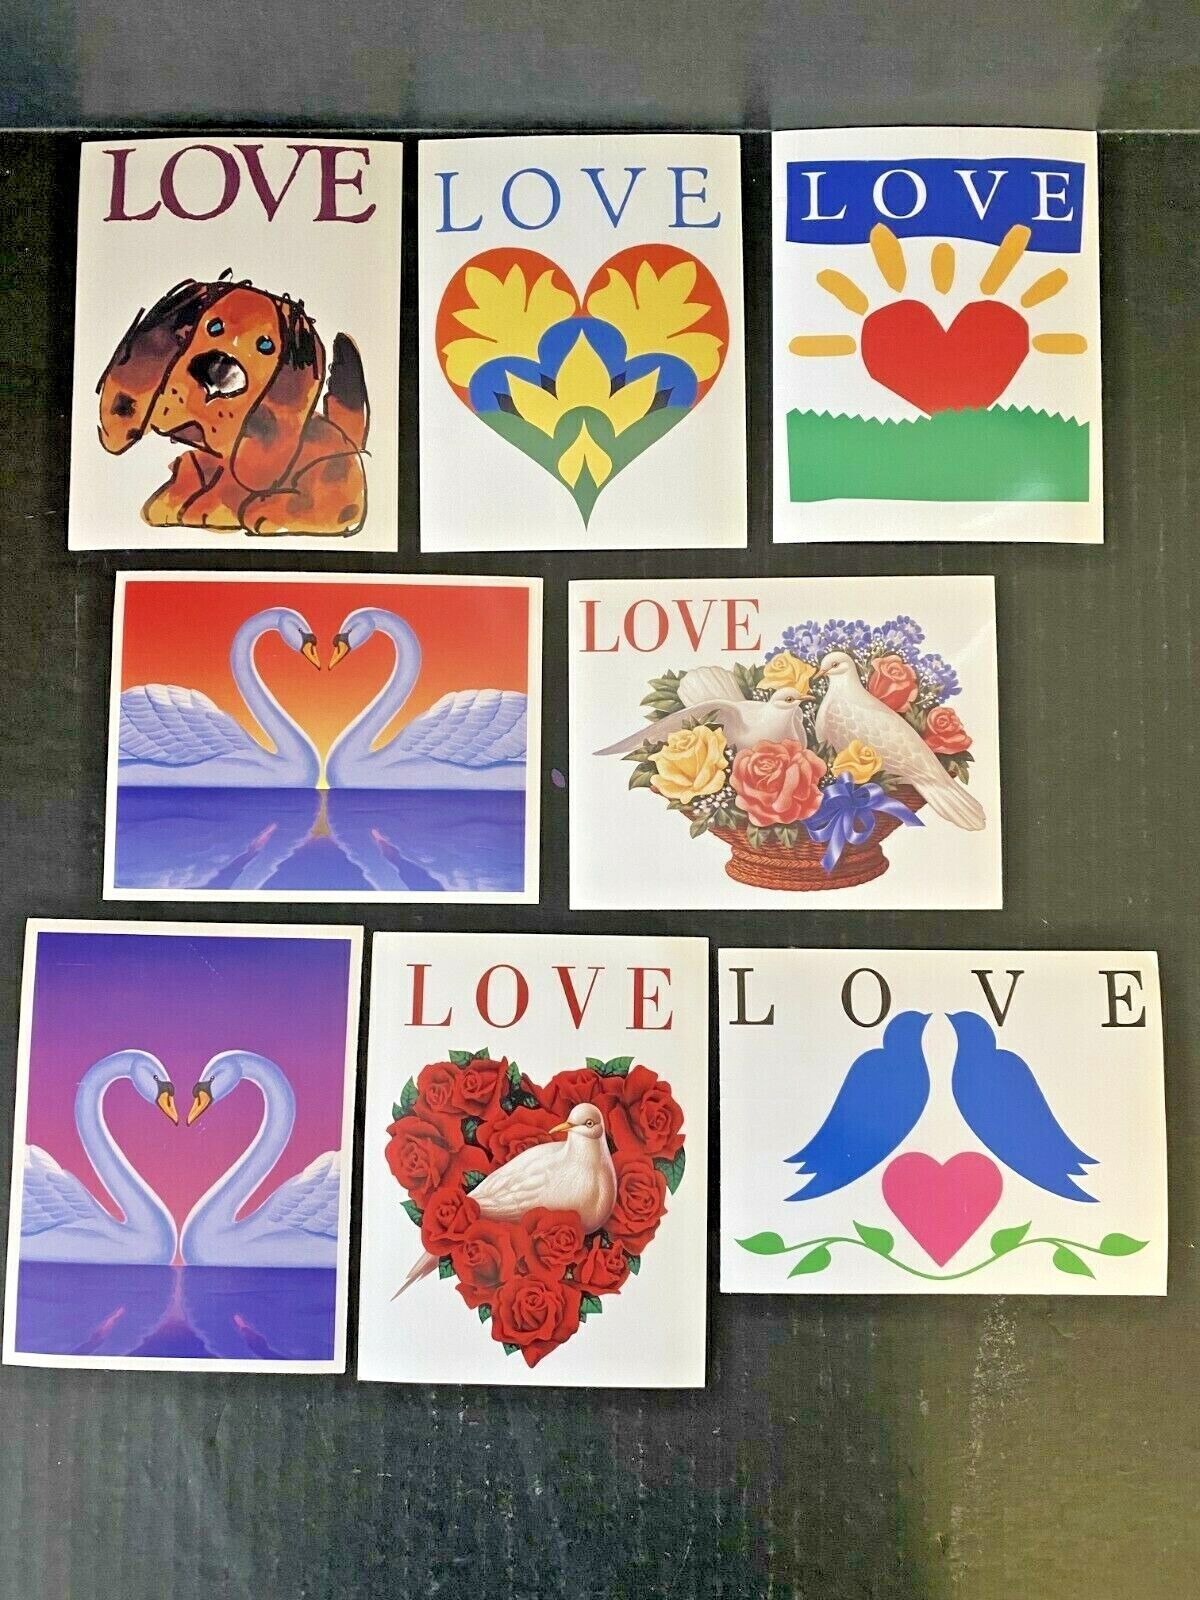 U.s. 1997 Love Postal Cards 8 Different All With 20¢ Printed Love Swan Stamp